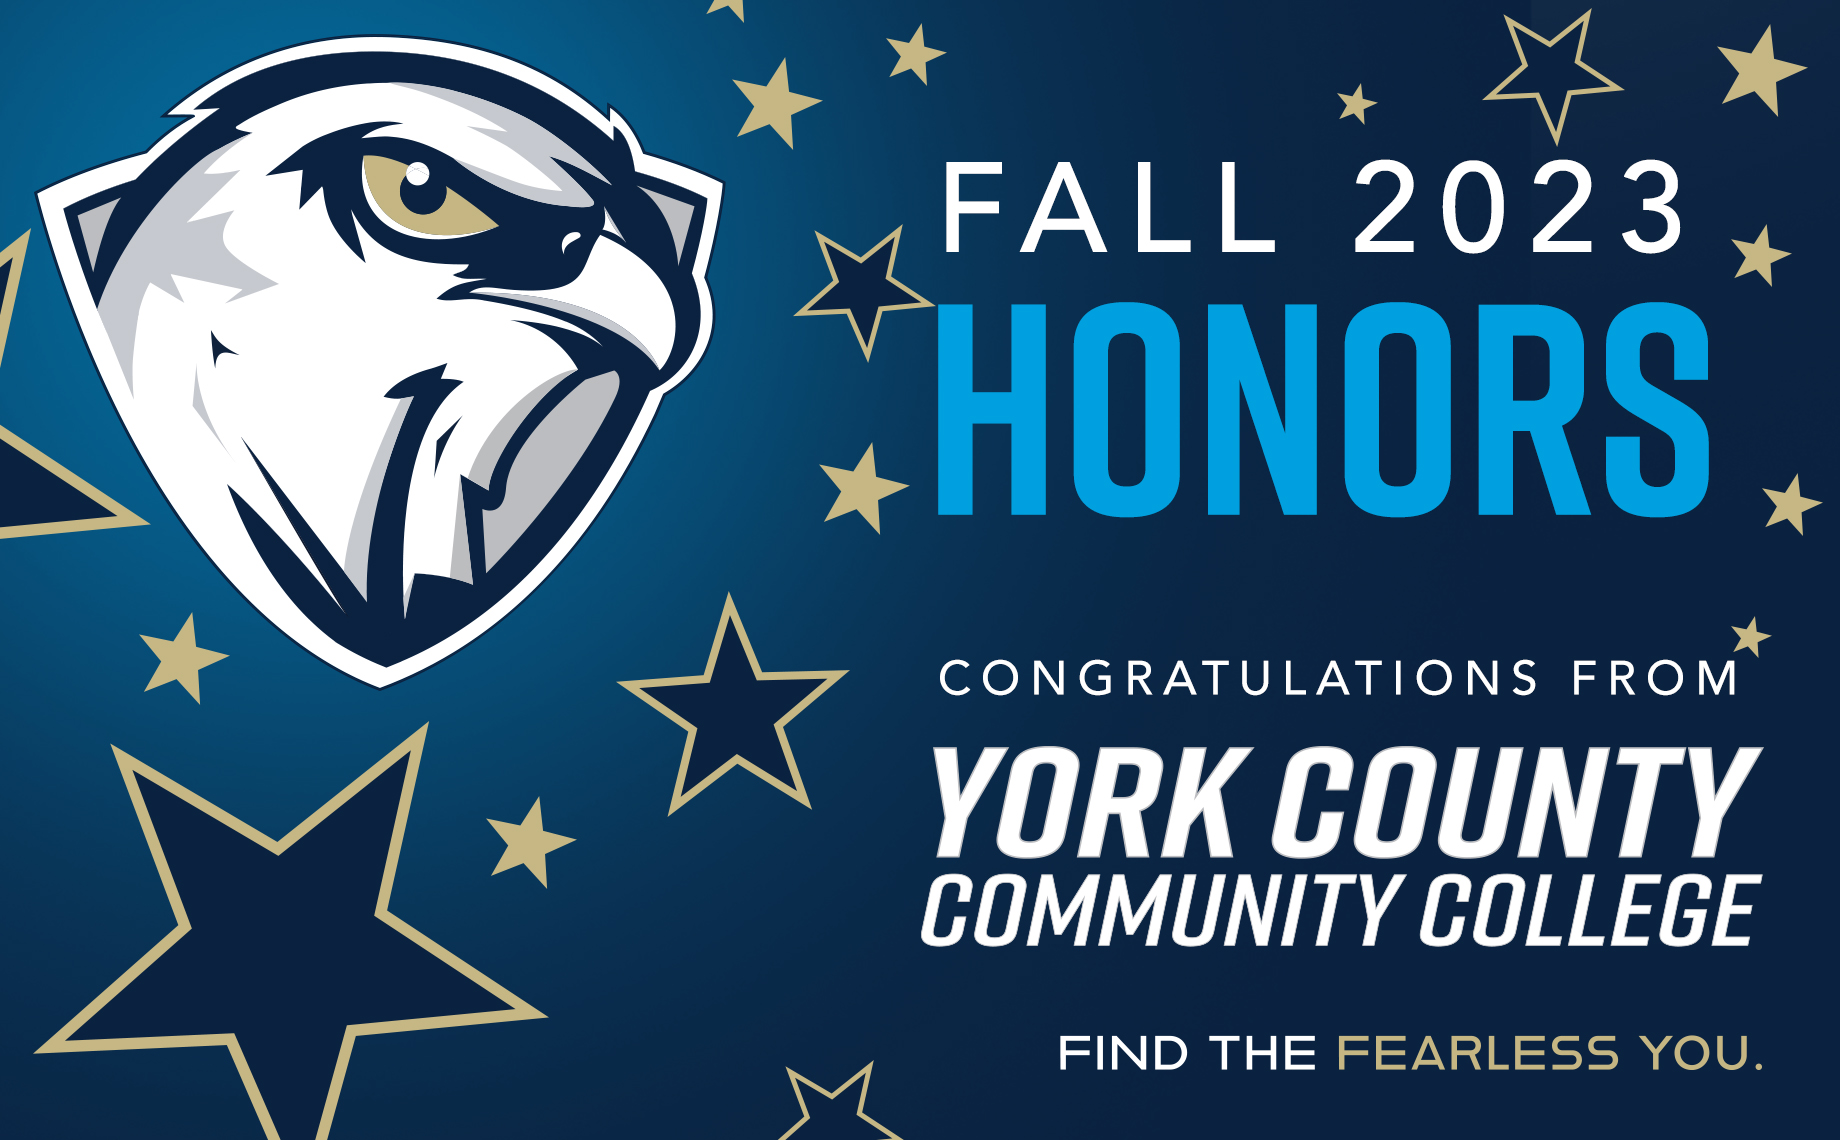 YCCC ANNOUNCES FALL 2023 HONORS